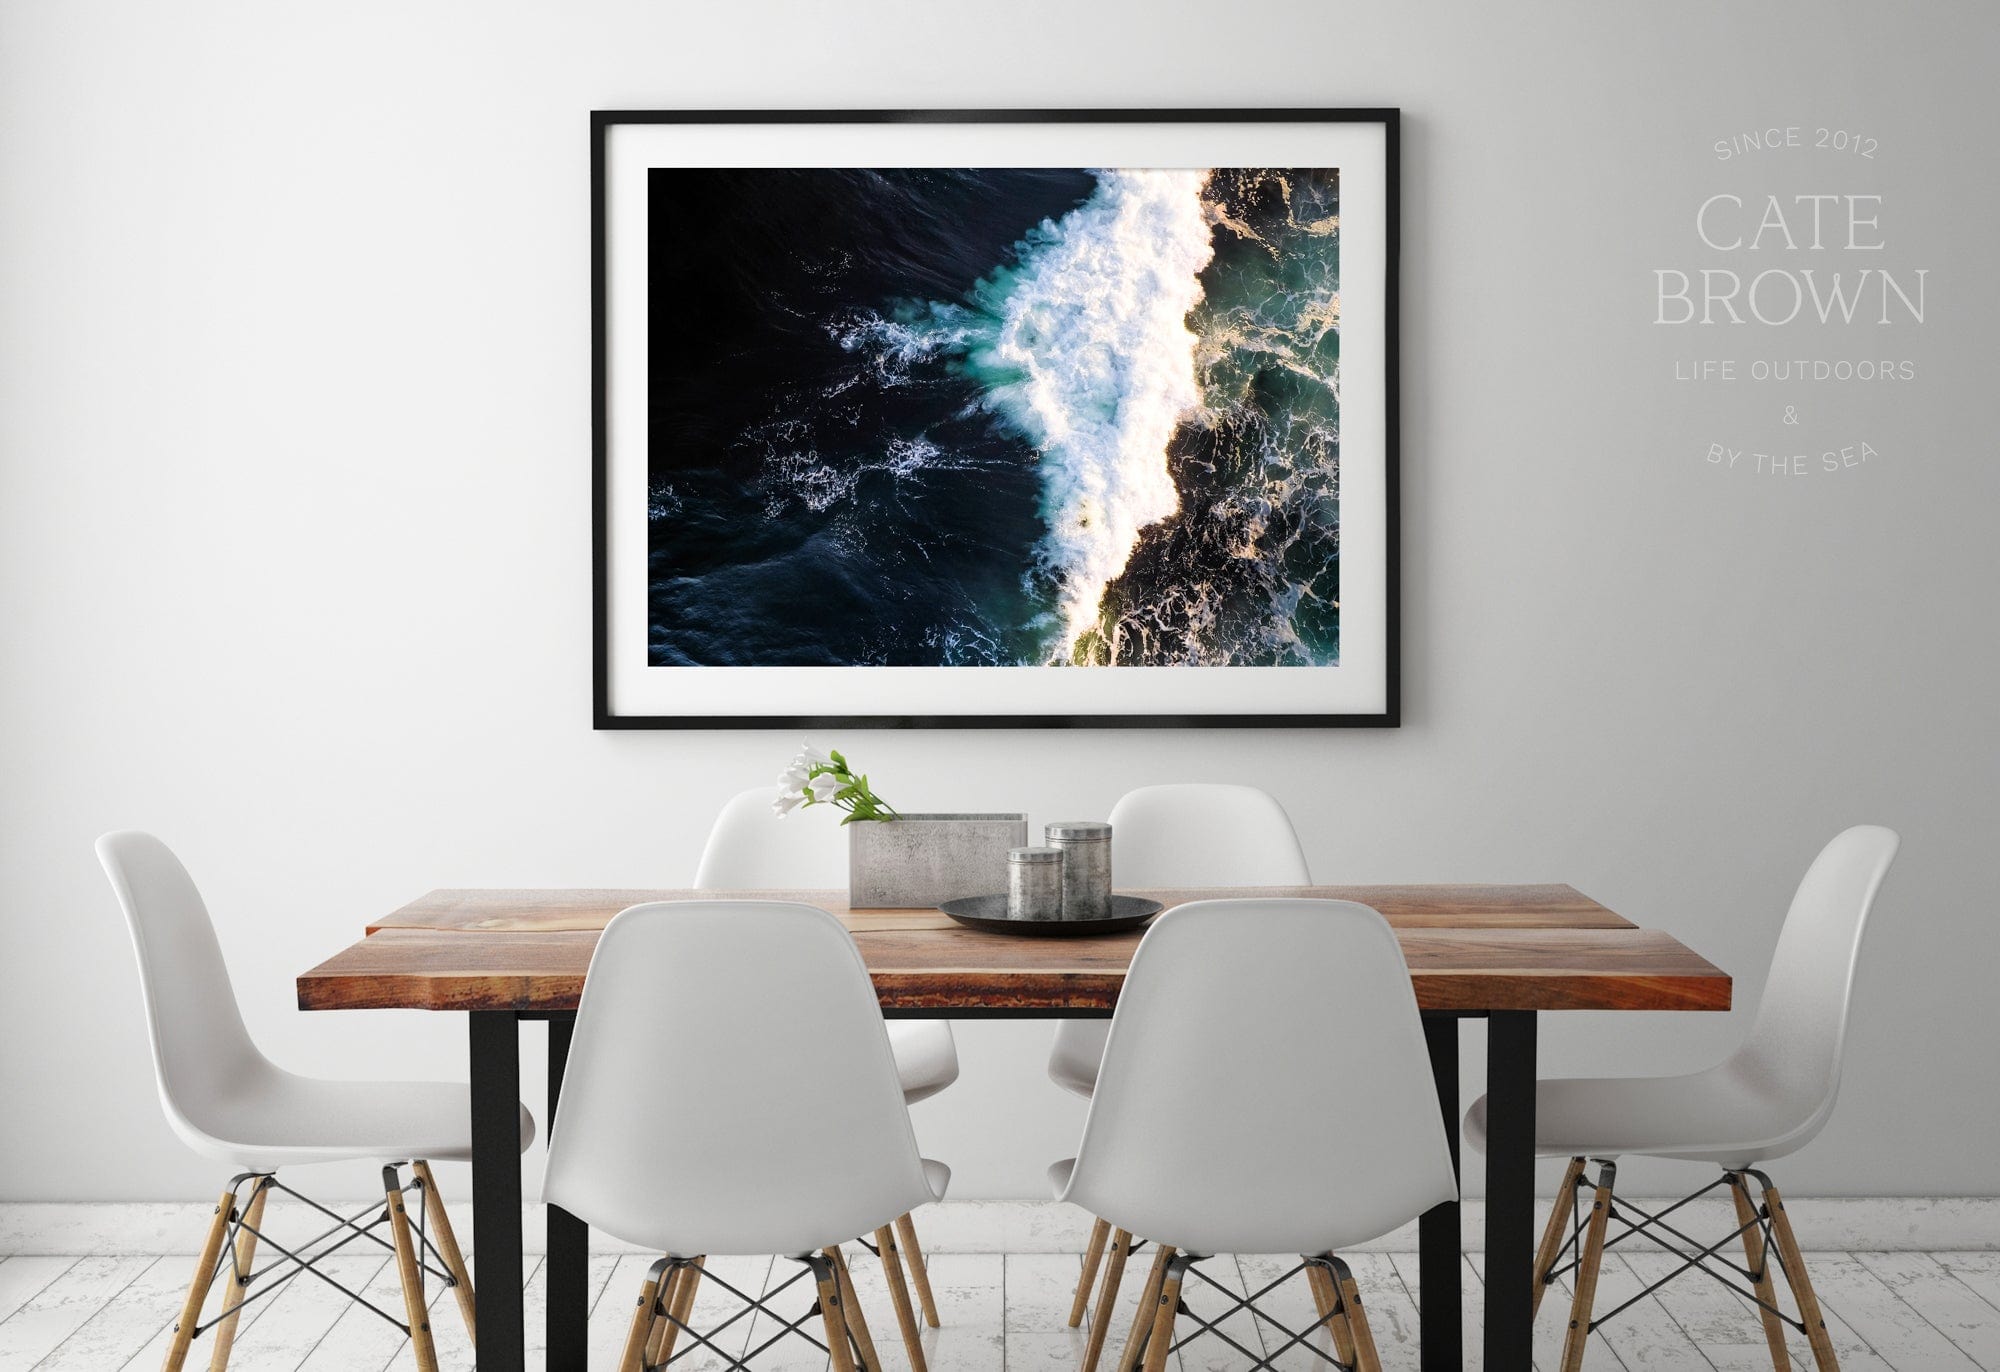 Cate Brown Photo Fine Art Print / 8"x12" / None (Print Only) Beavertail #1  //  Aerial Photography Made to Order Ocean Fine Art